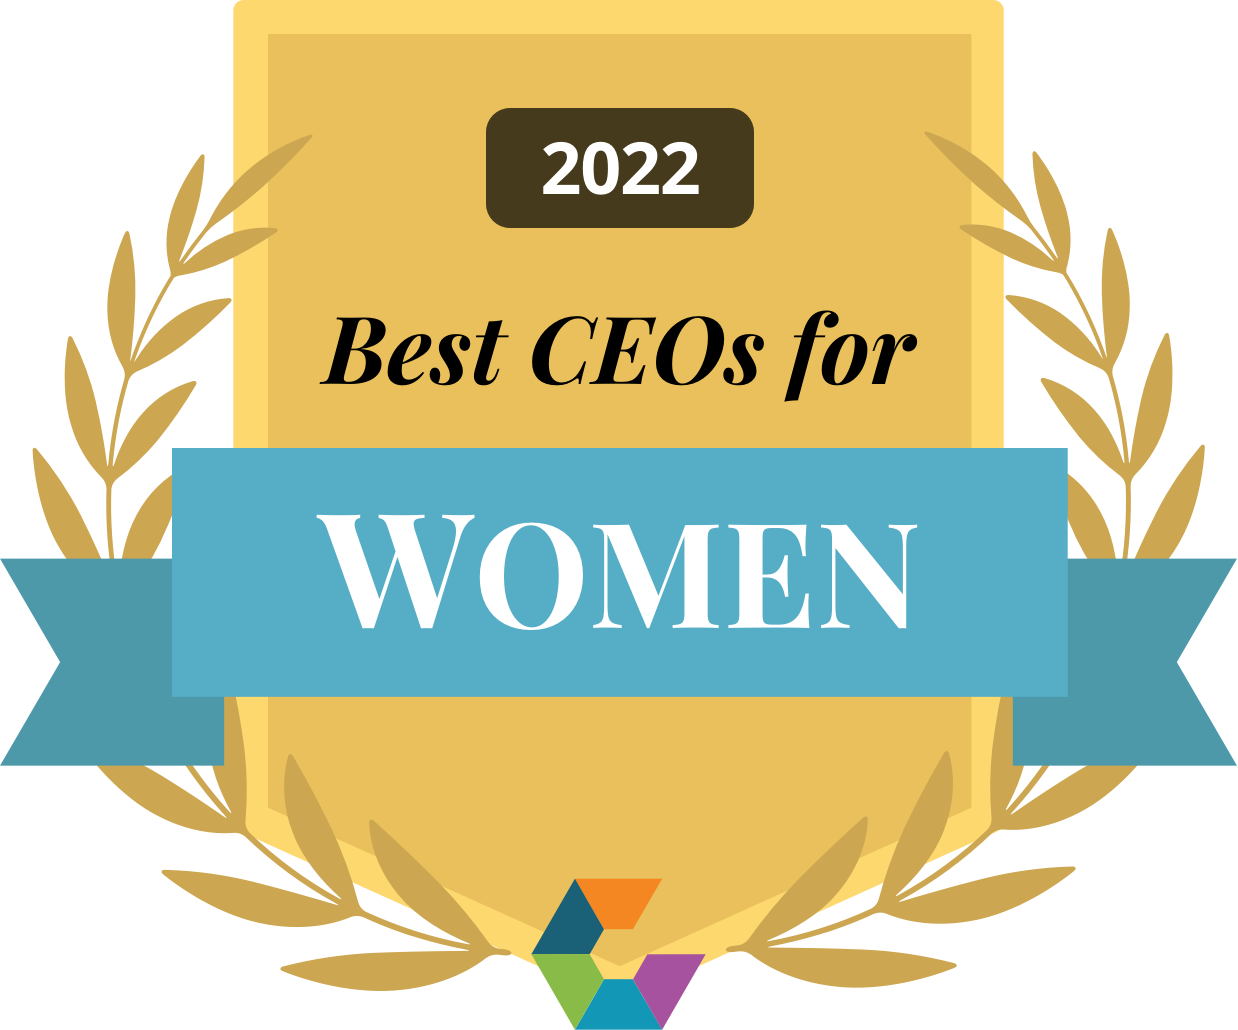 comparably best CEO for women 2022